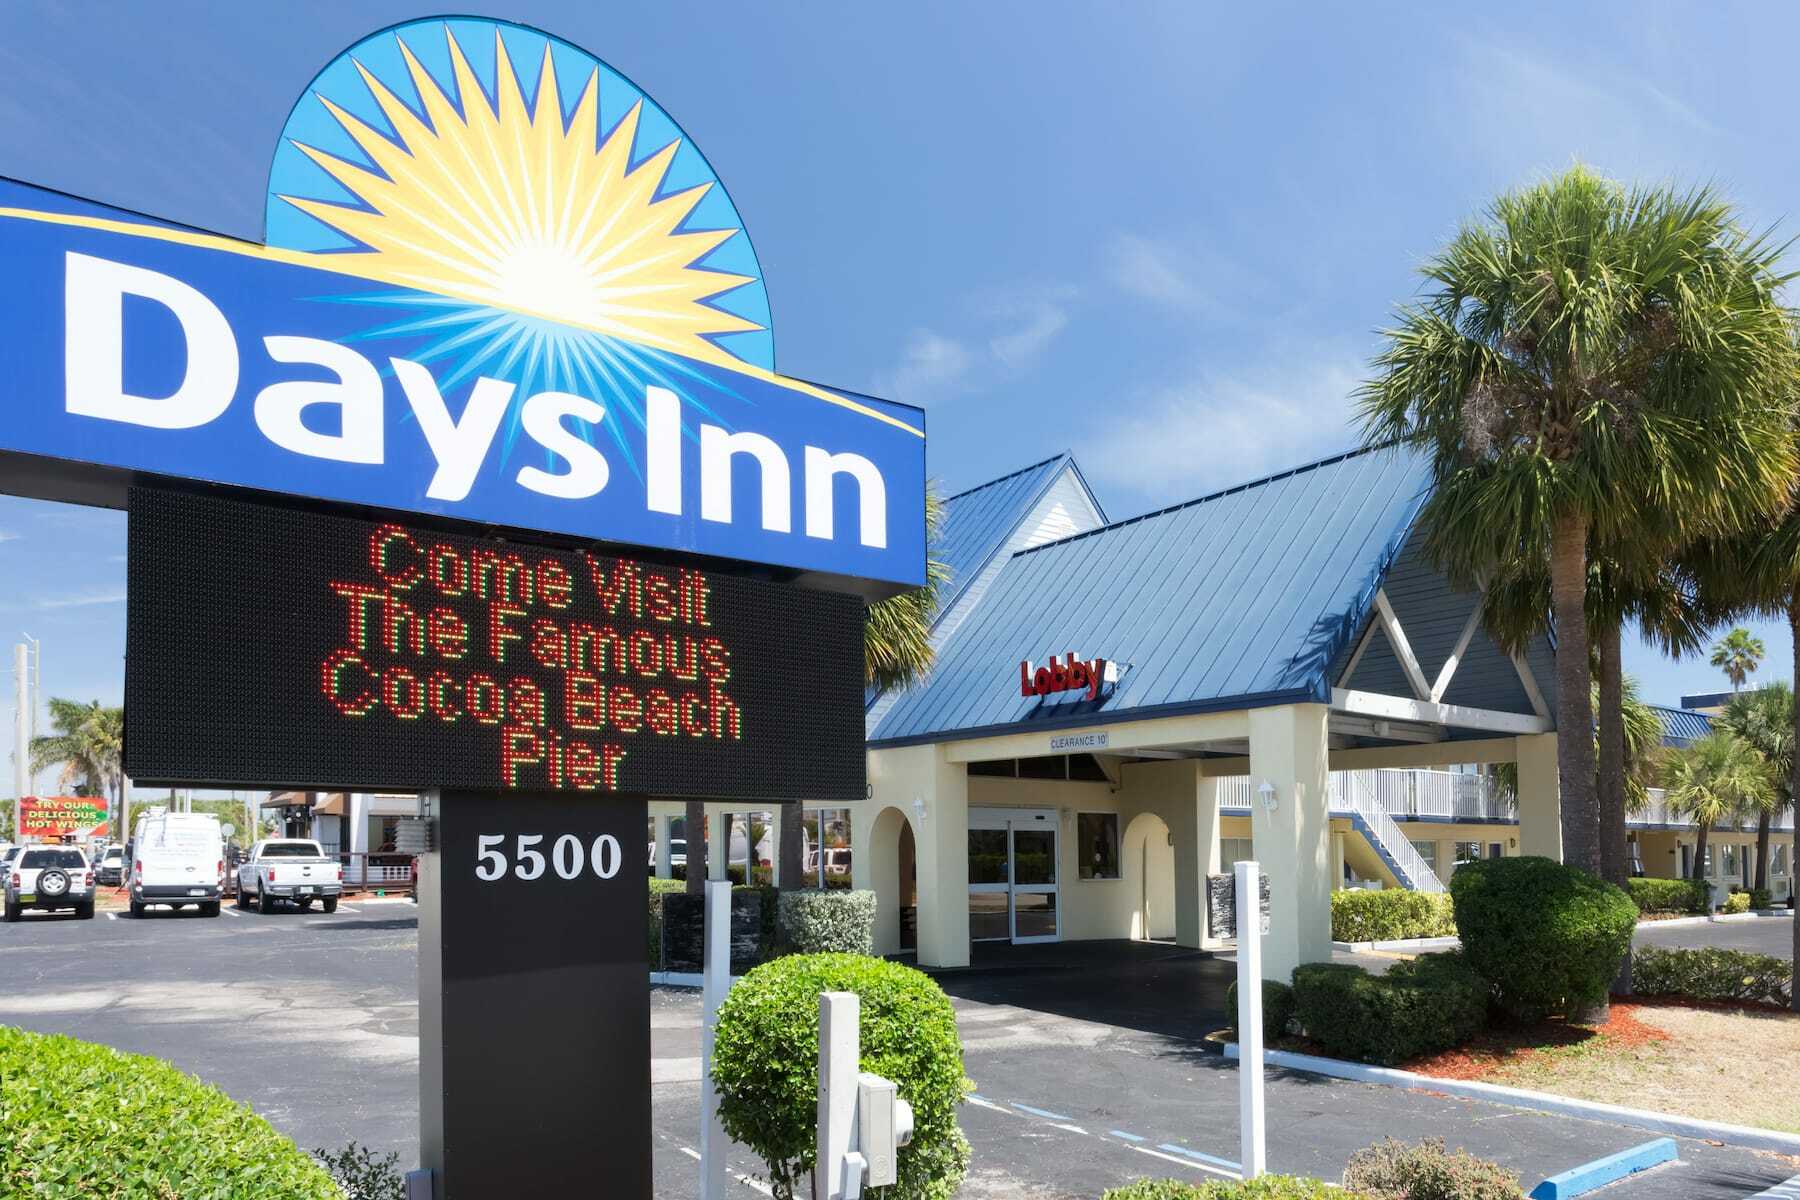 Photo of Best Western & Days Inn by Wyndham in Cocoa Beach/Cape Canaveral, Cocoa Beach, FL